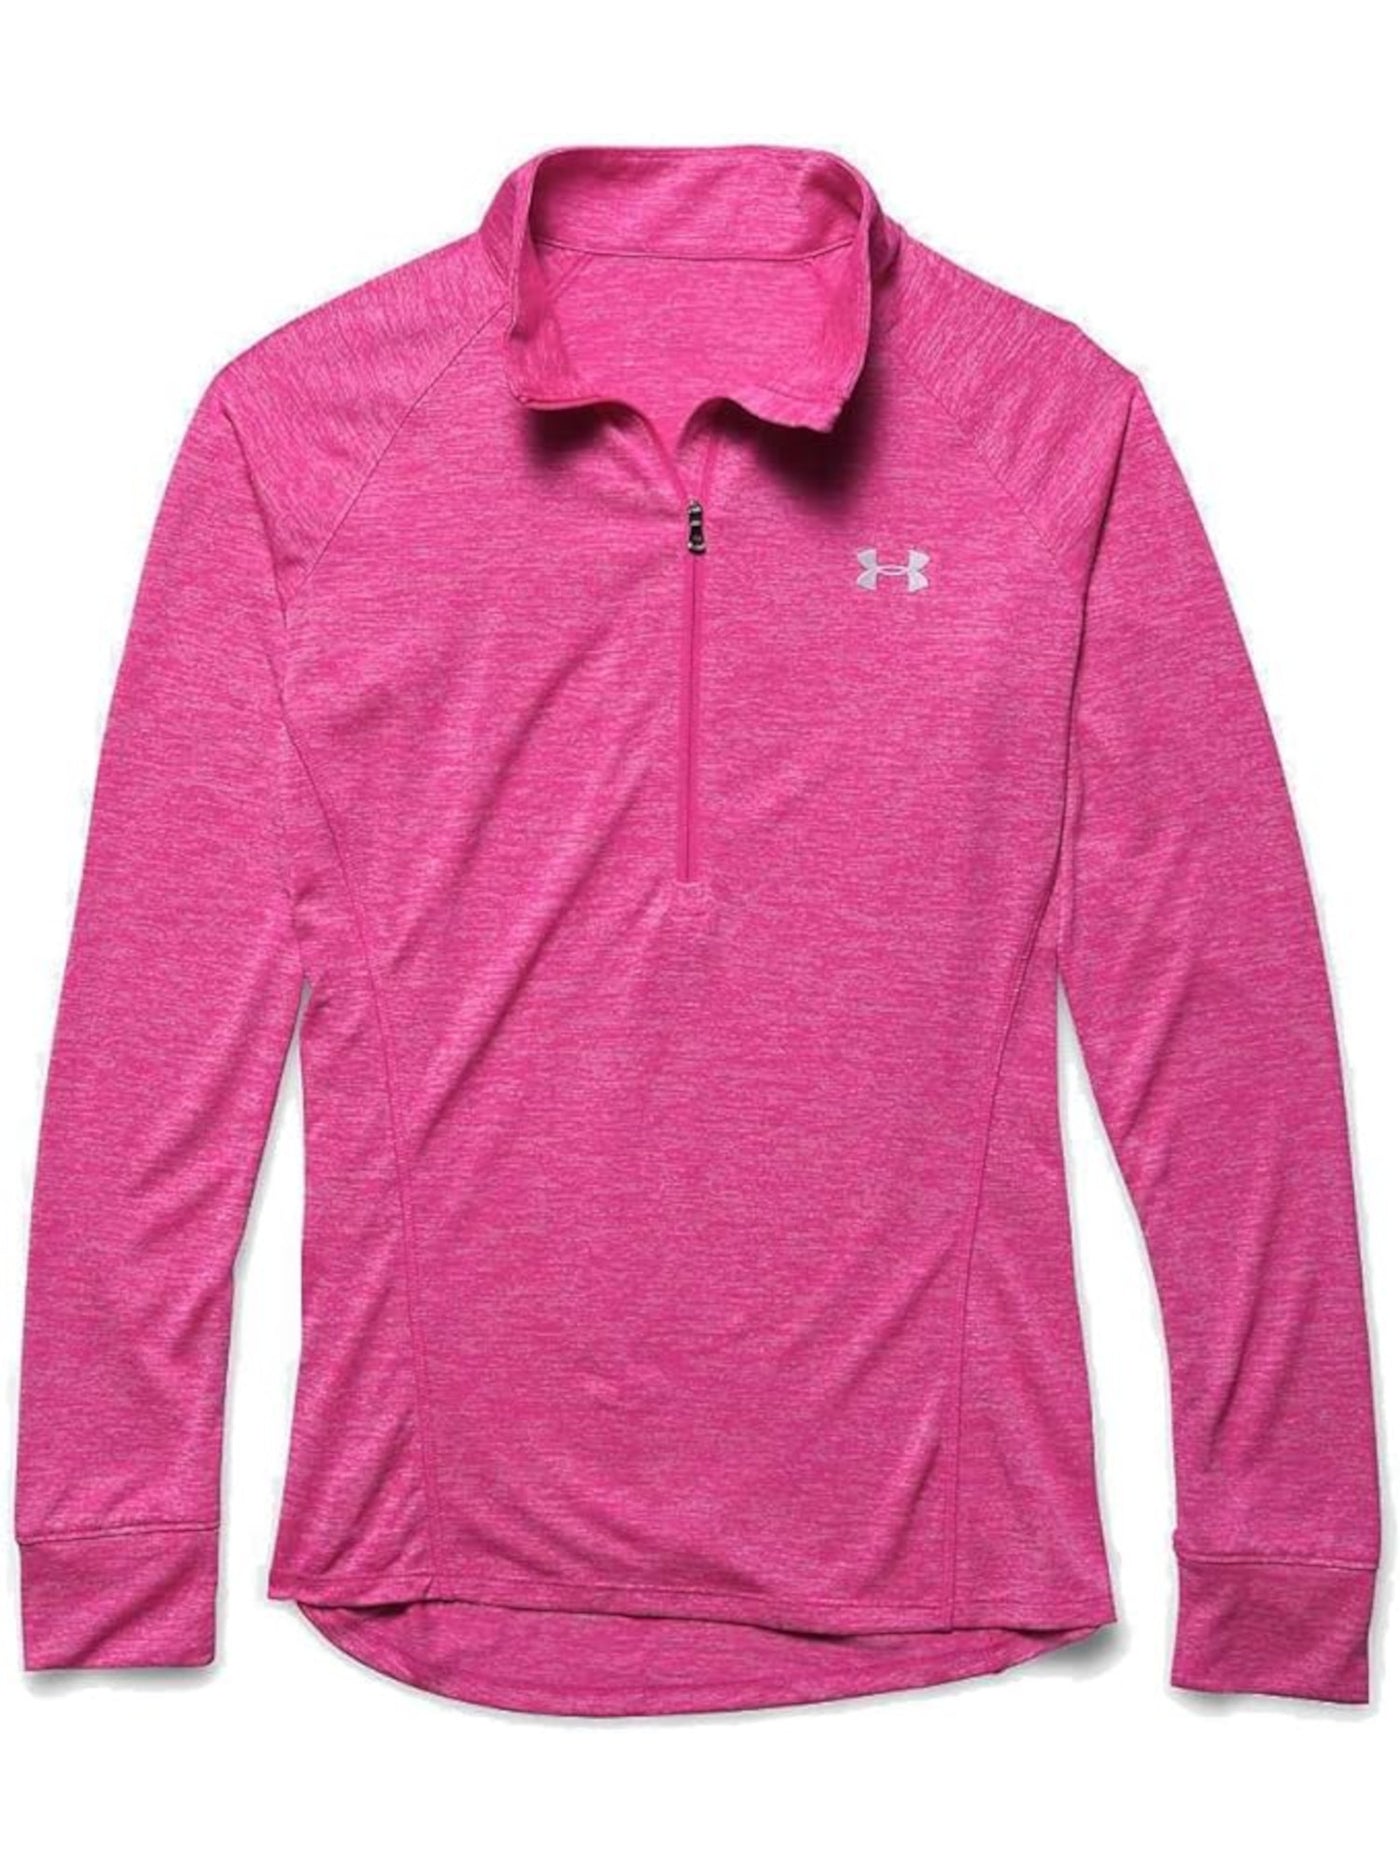 UNDER ARMOUR Womens Pink Heather Long Sleeve Zip Neck Top SM